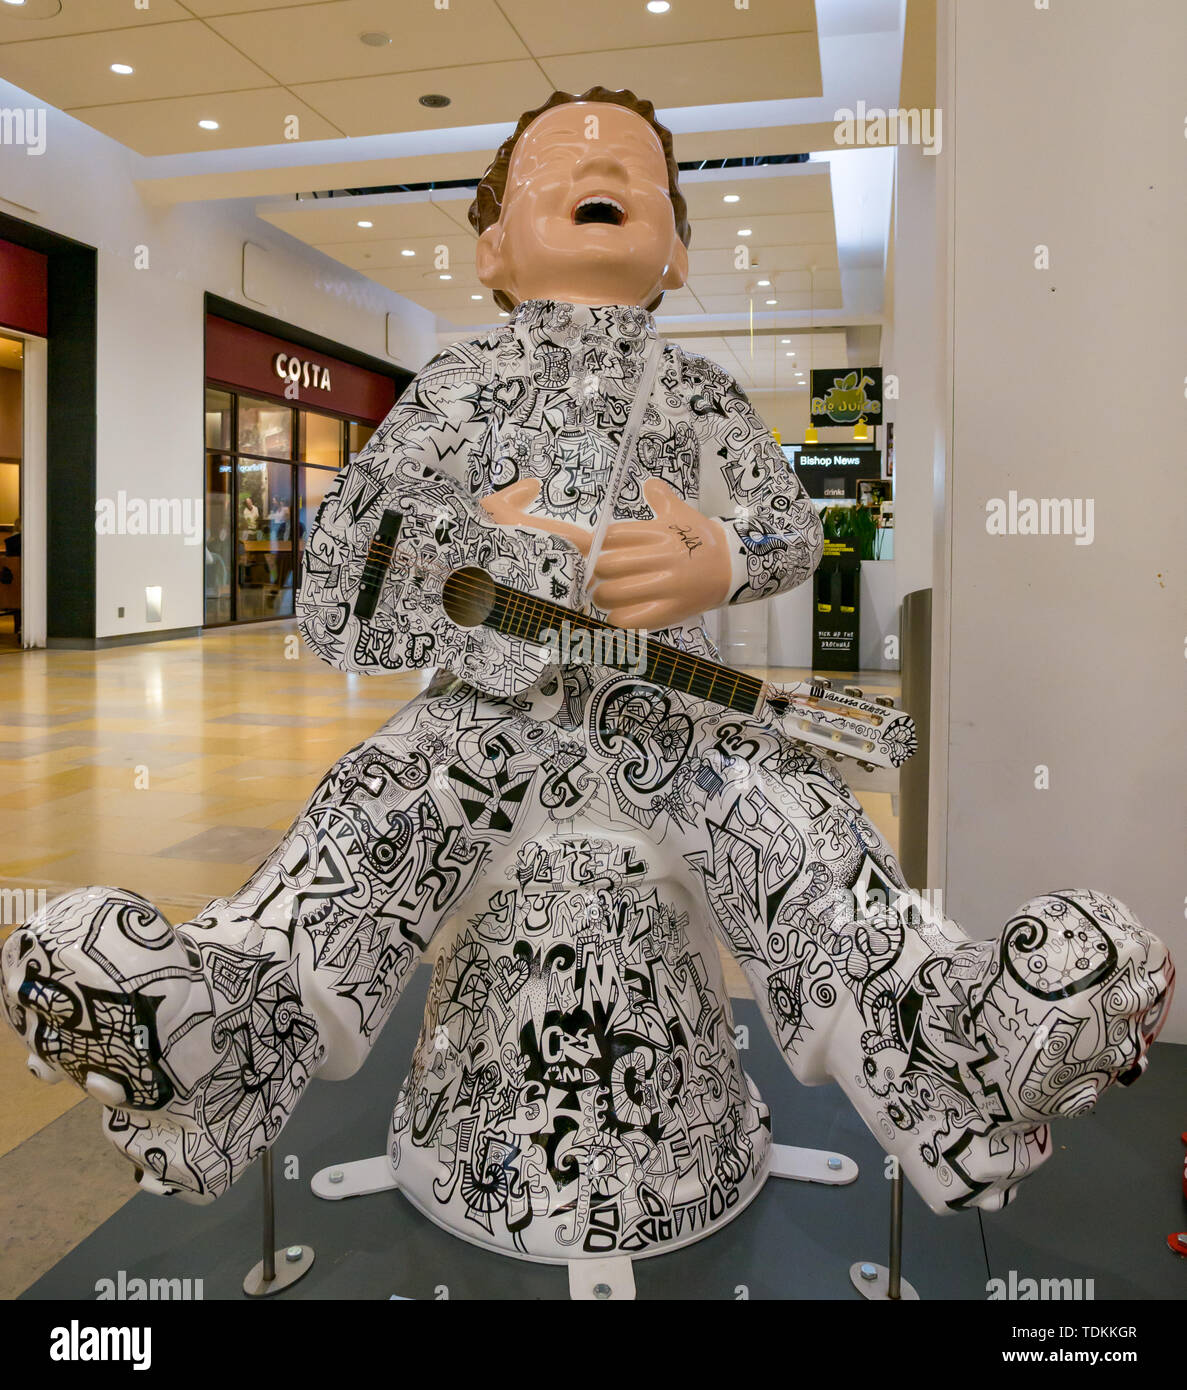 Leith, Edinburgh, Scotland, United Kingdom, 17 June 2019. Oor Wullie's Big Bucket Trail: An art trail of 200 Oor Wullie sculptures appear in Scottish cities in a mass arts event that lasts until August 30th. Oor Wullie is an iconic Scottish cartoon character from the Sunday Post newspaper. The sculptures will be auctioned to raise money for Scotland’s children’s hospital charities. There are 5 in the Leith area, and 60 in Edinburgh altogether. The Proclaimers, Charlie Reid, at Ocean Terminal by Vanessa Gibson Stock Photo